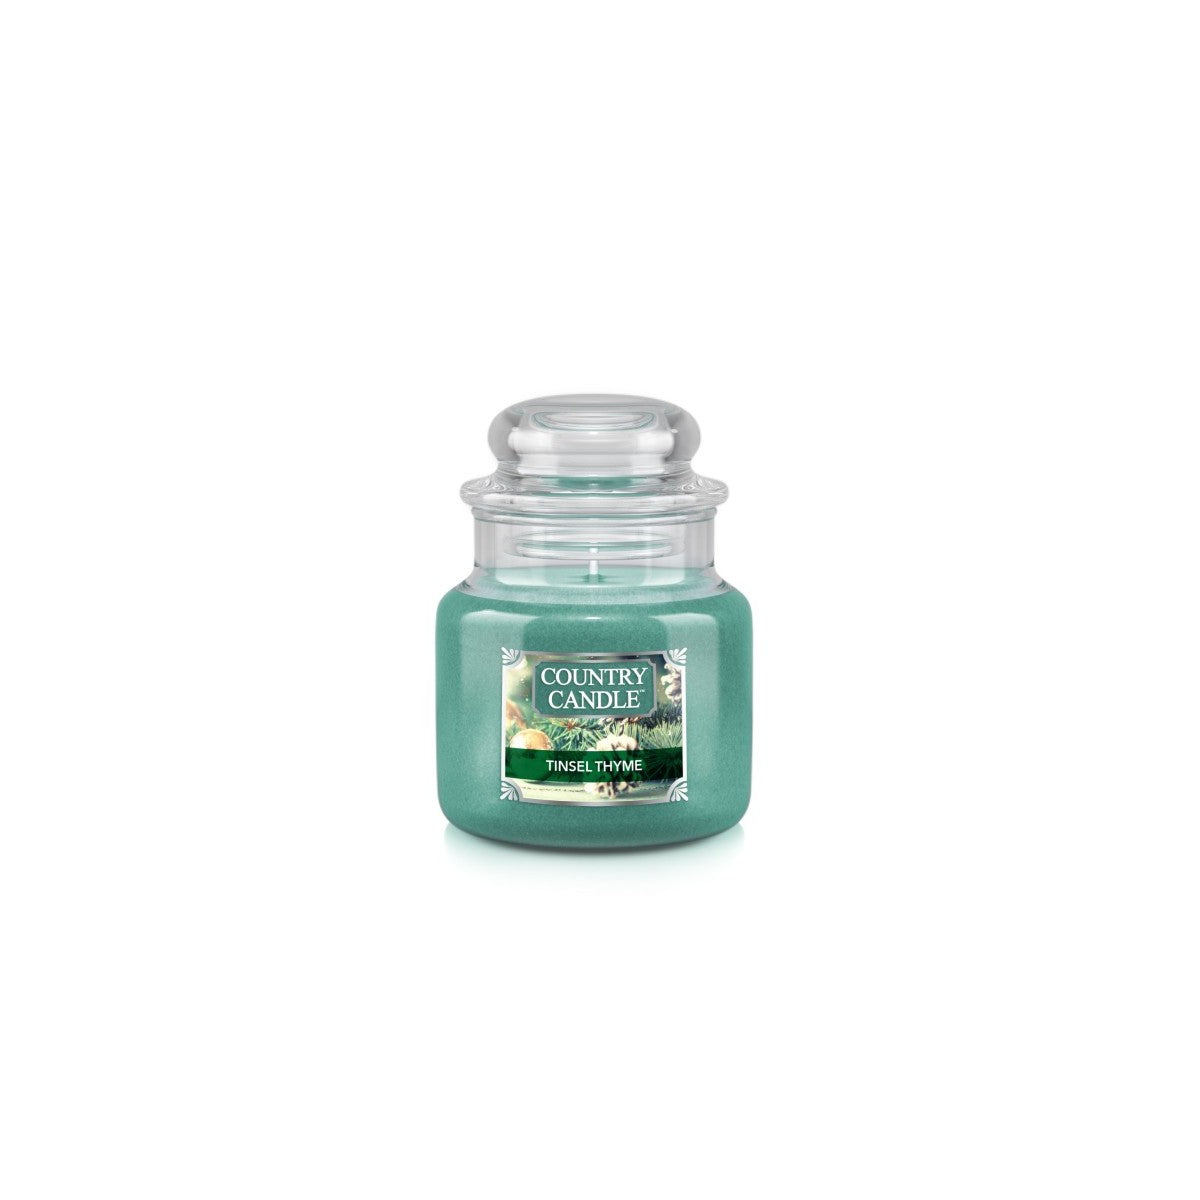 Giara piccola Tinsel thyme-Country Candle